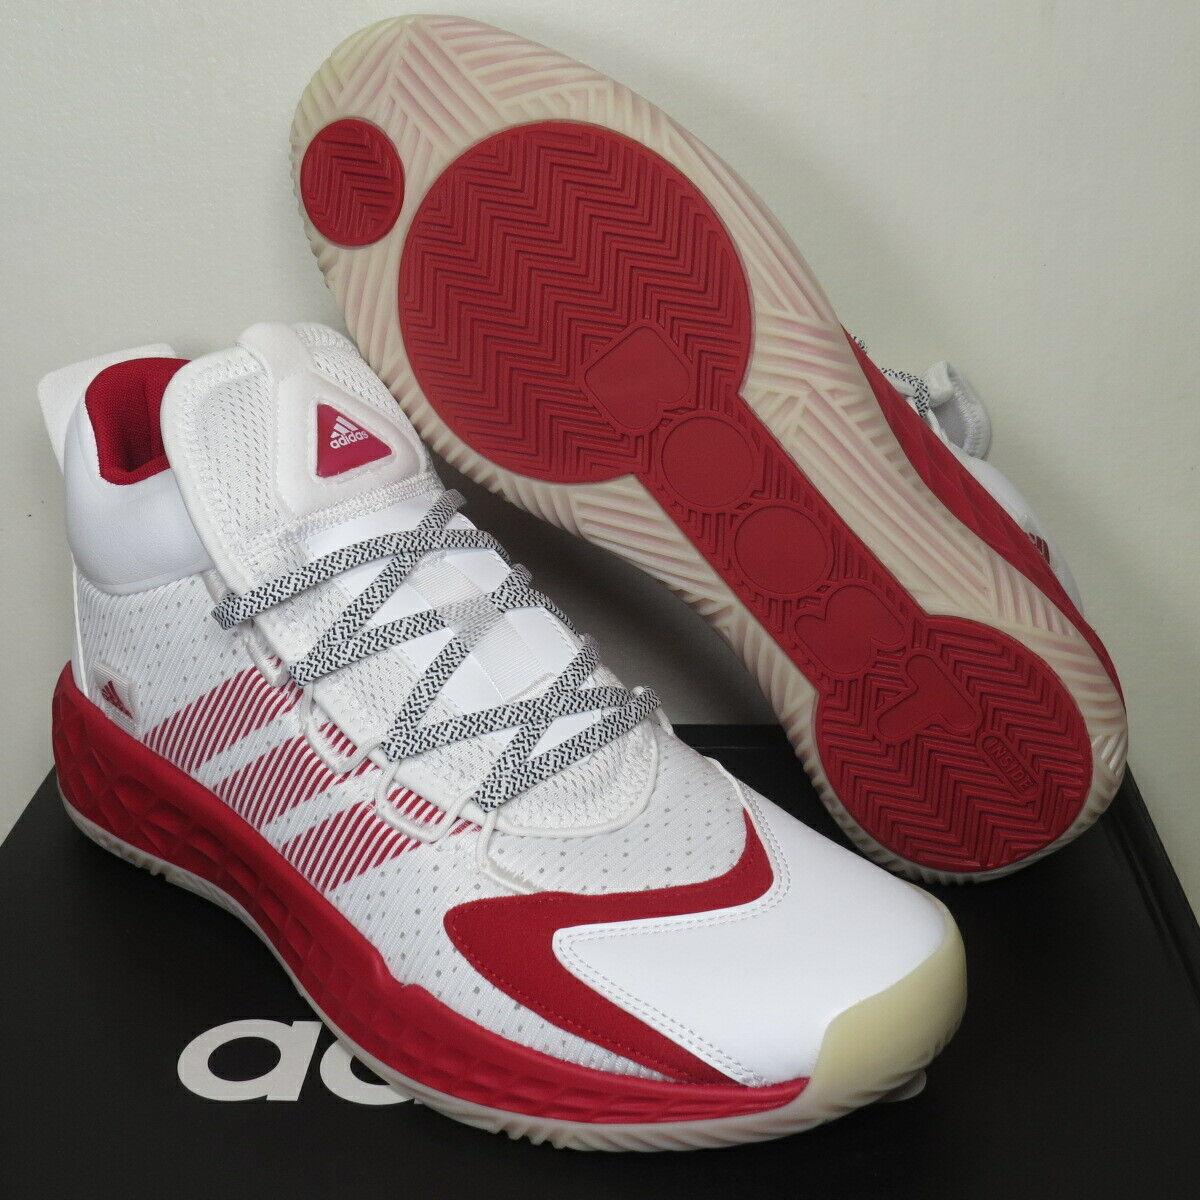 mens basketball shoes size 11